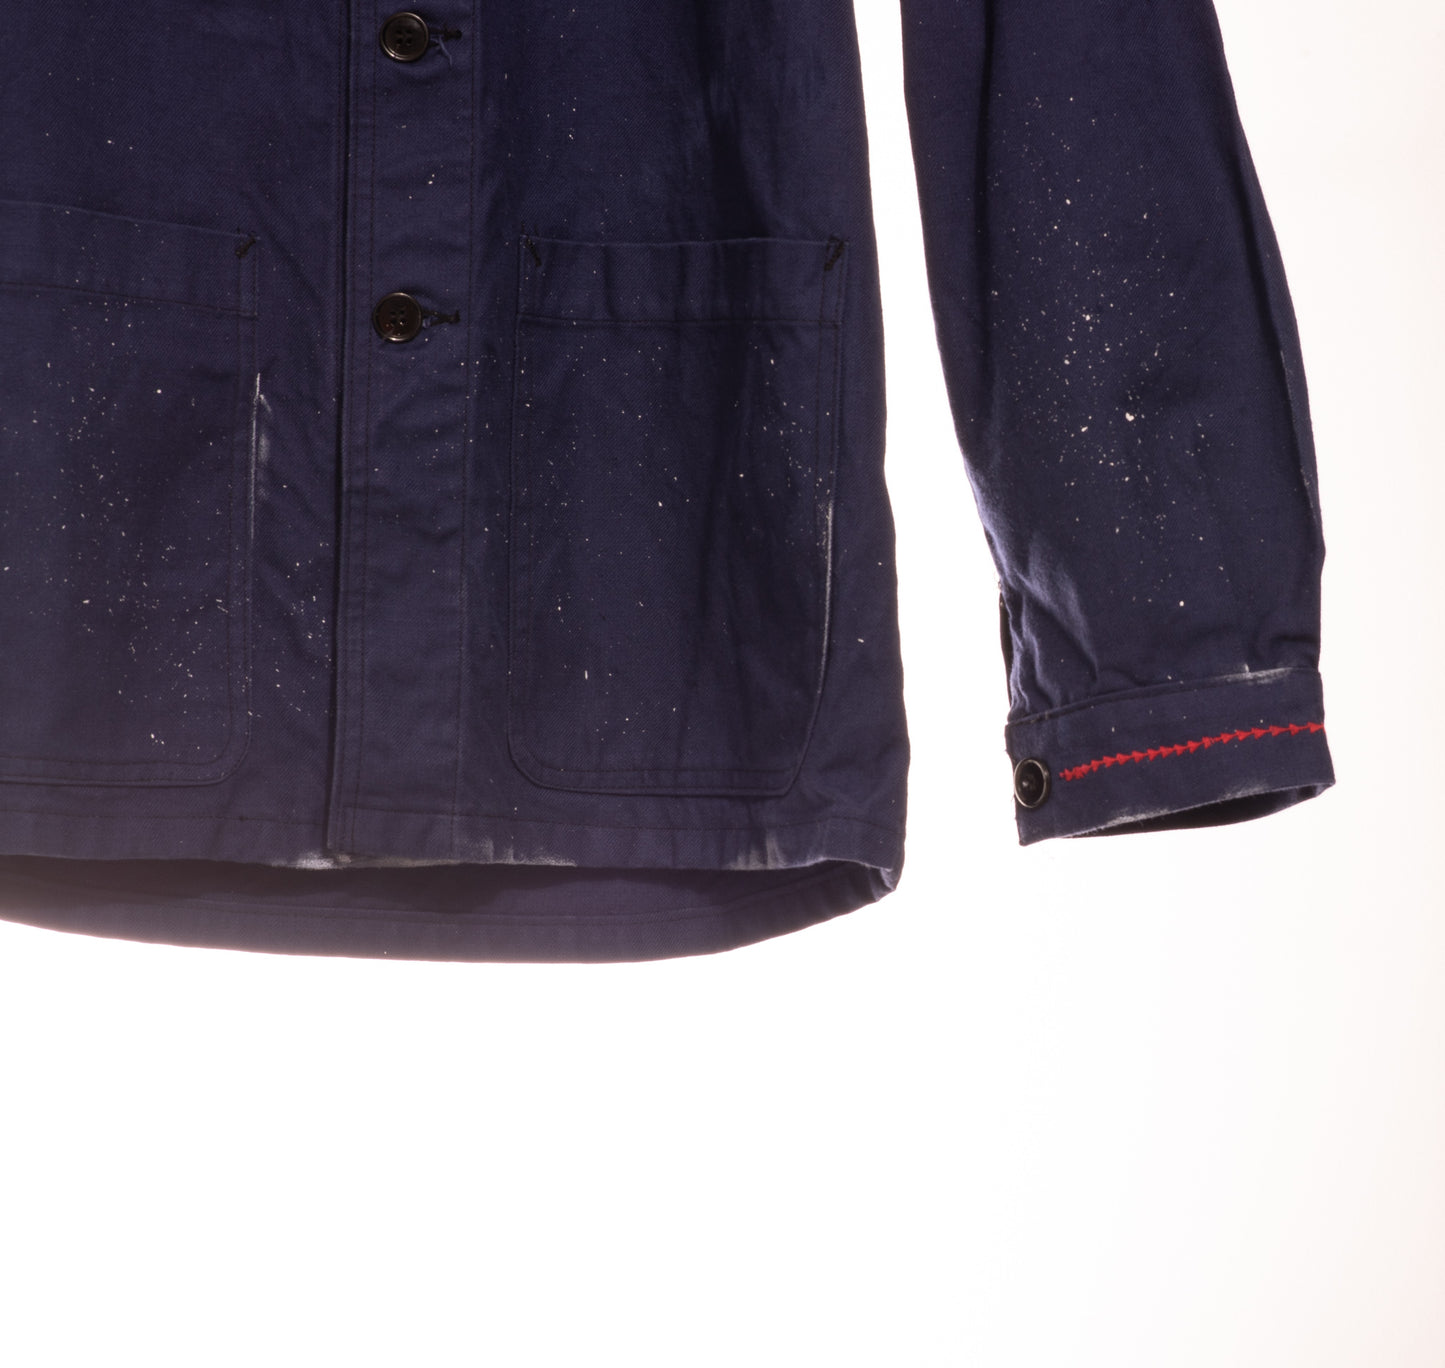 THE FRENCH WORKER JACKET